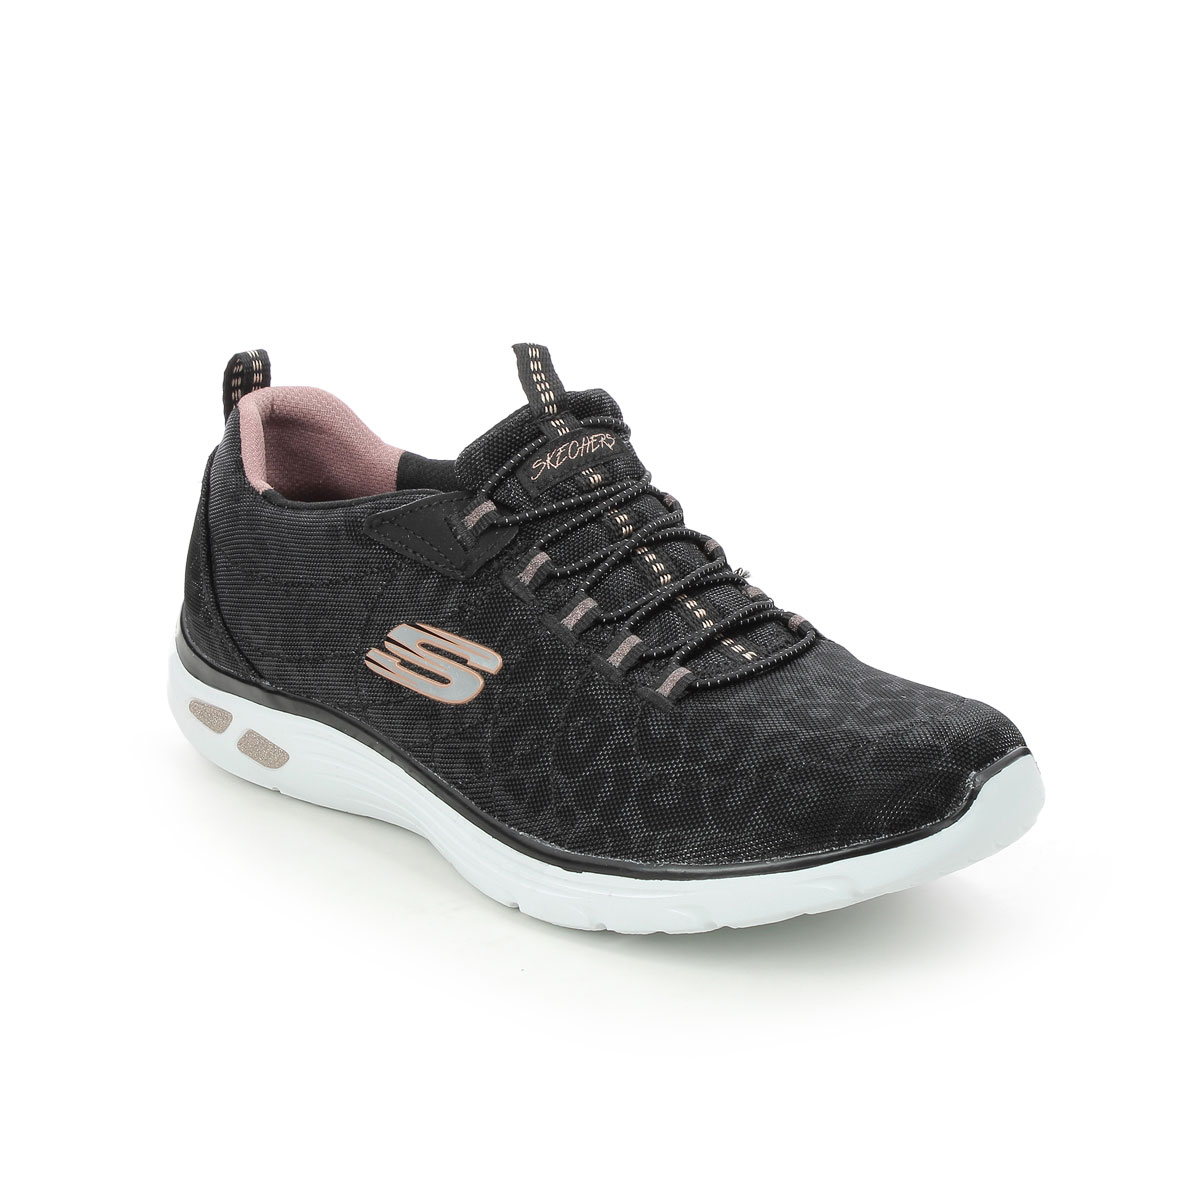 Skechers Empire Delux Spotted Relaxed Black Rose Gold Womens Trainers 12825 In Size 6.5 In Plain Black Rose Gold